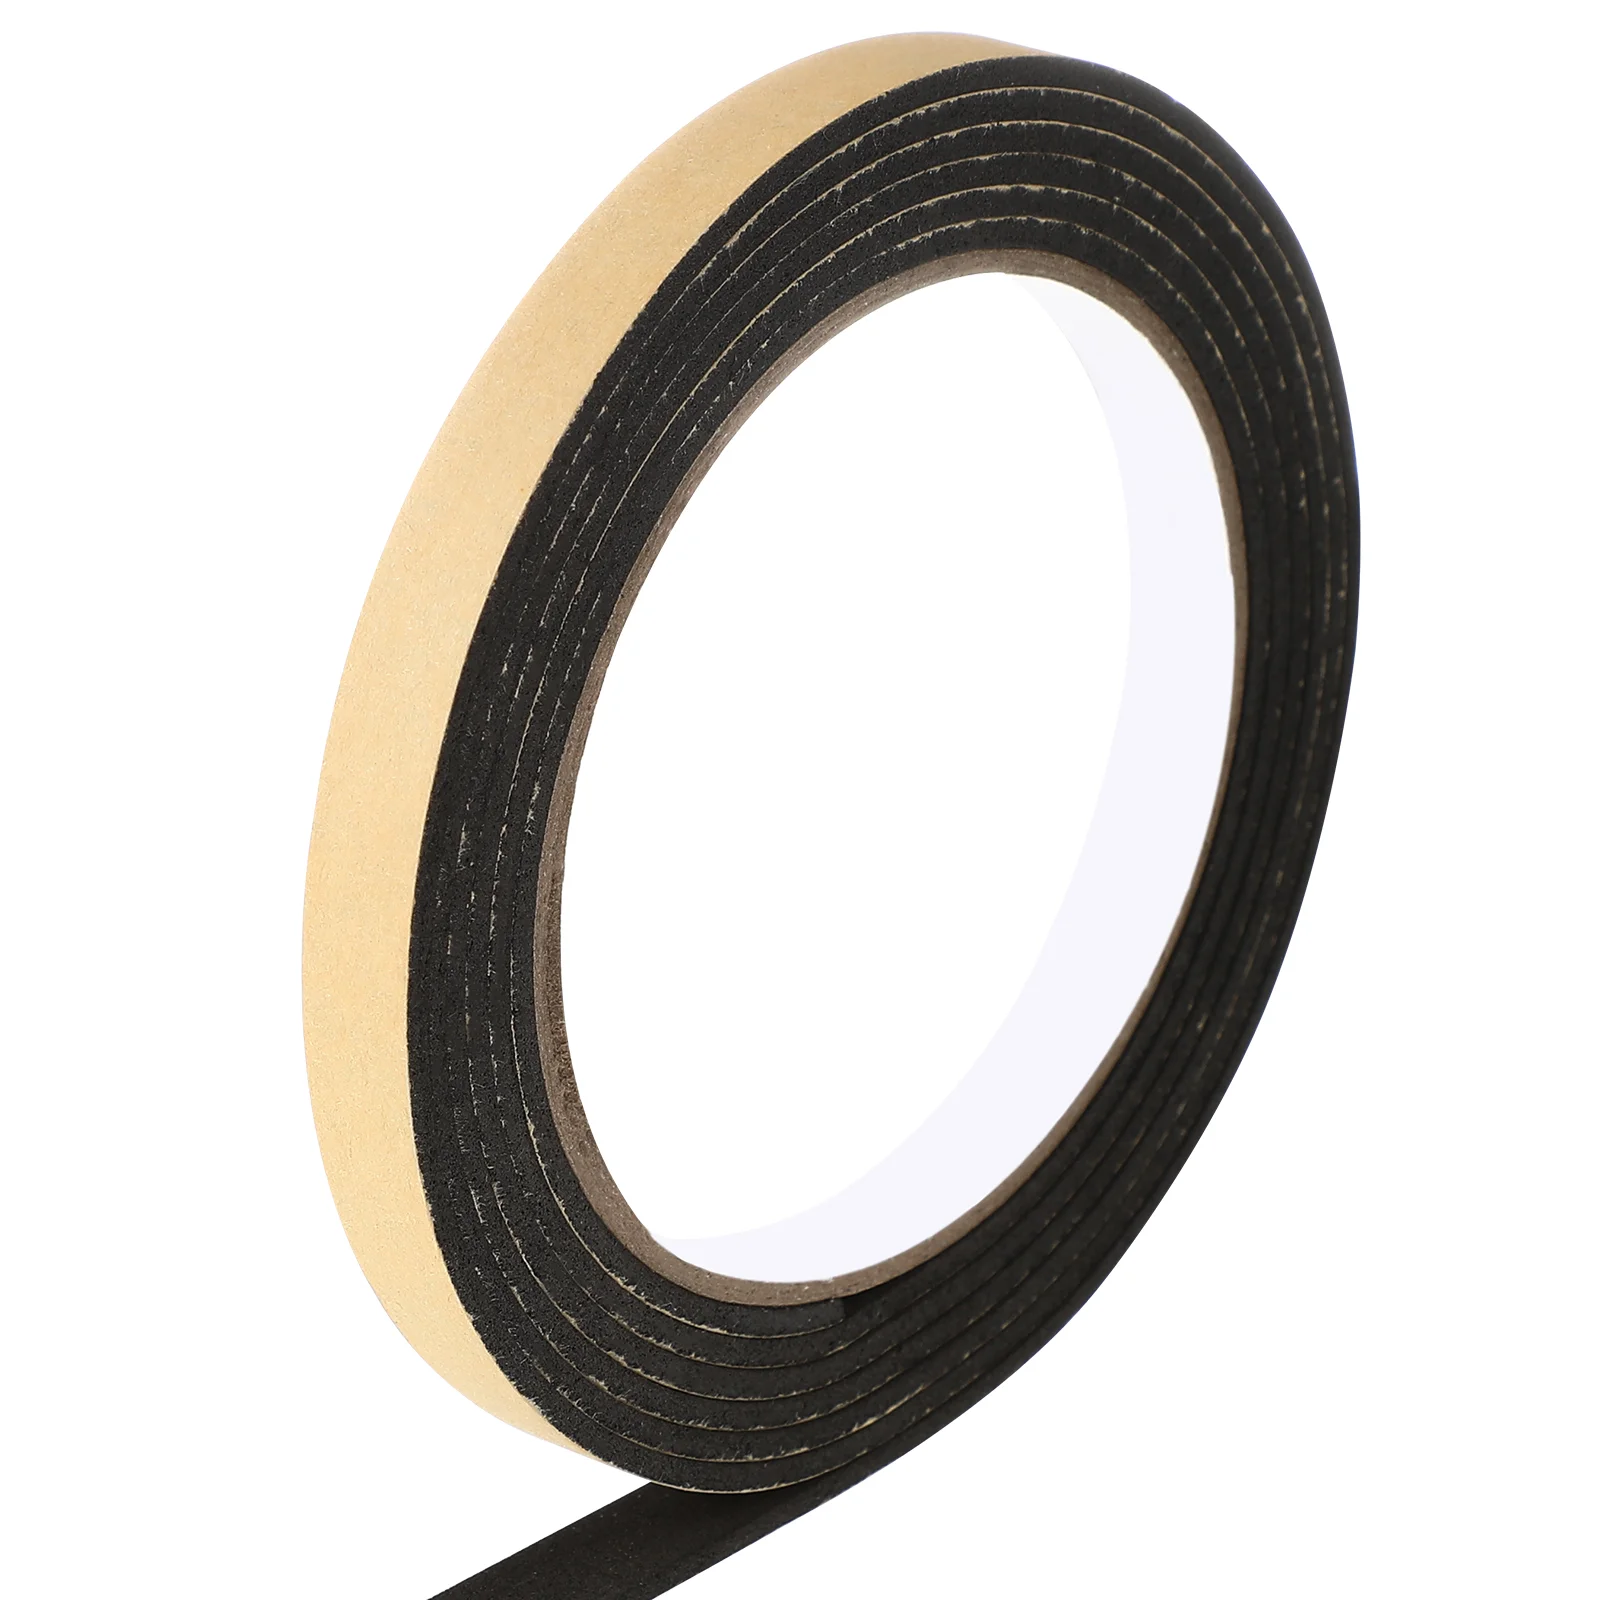 Gas Hob Gasket Ceramic Sealant Cooker Sealing Strip Black White Out Tape Tapes Tool Adhesive Pipeline